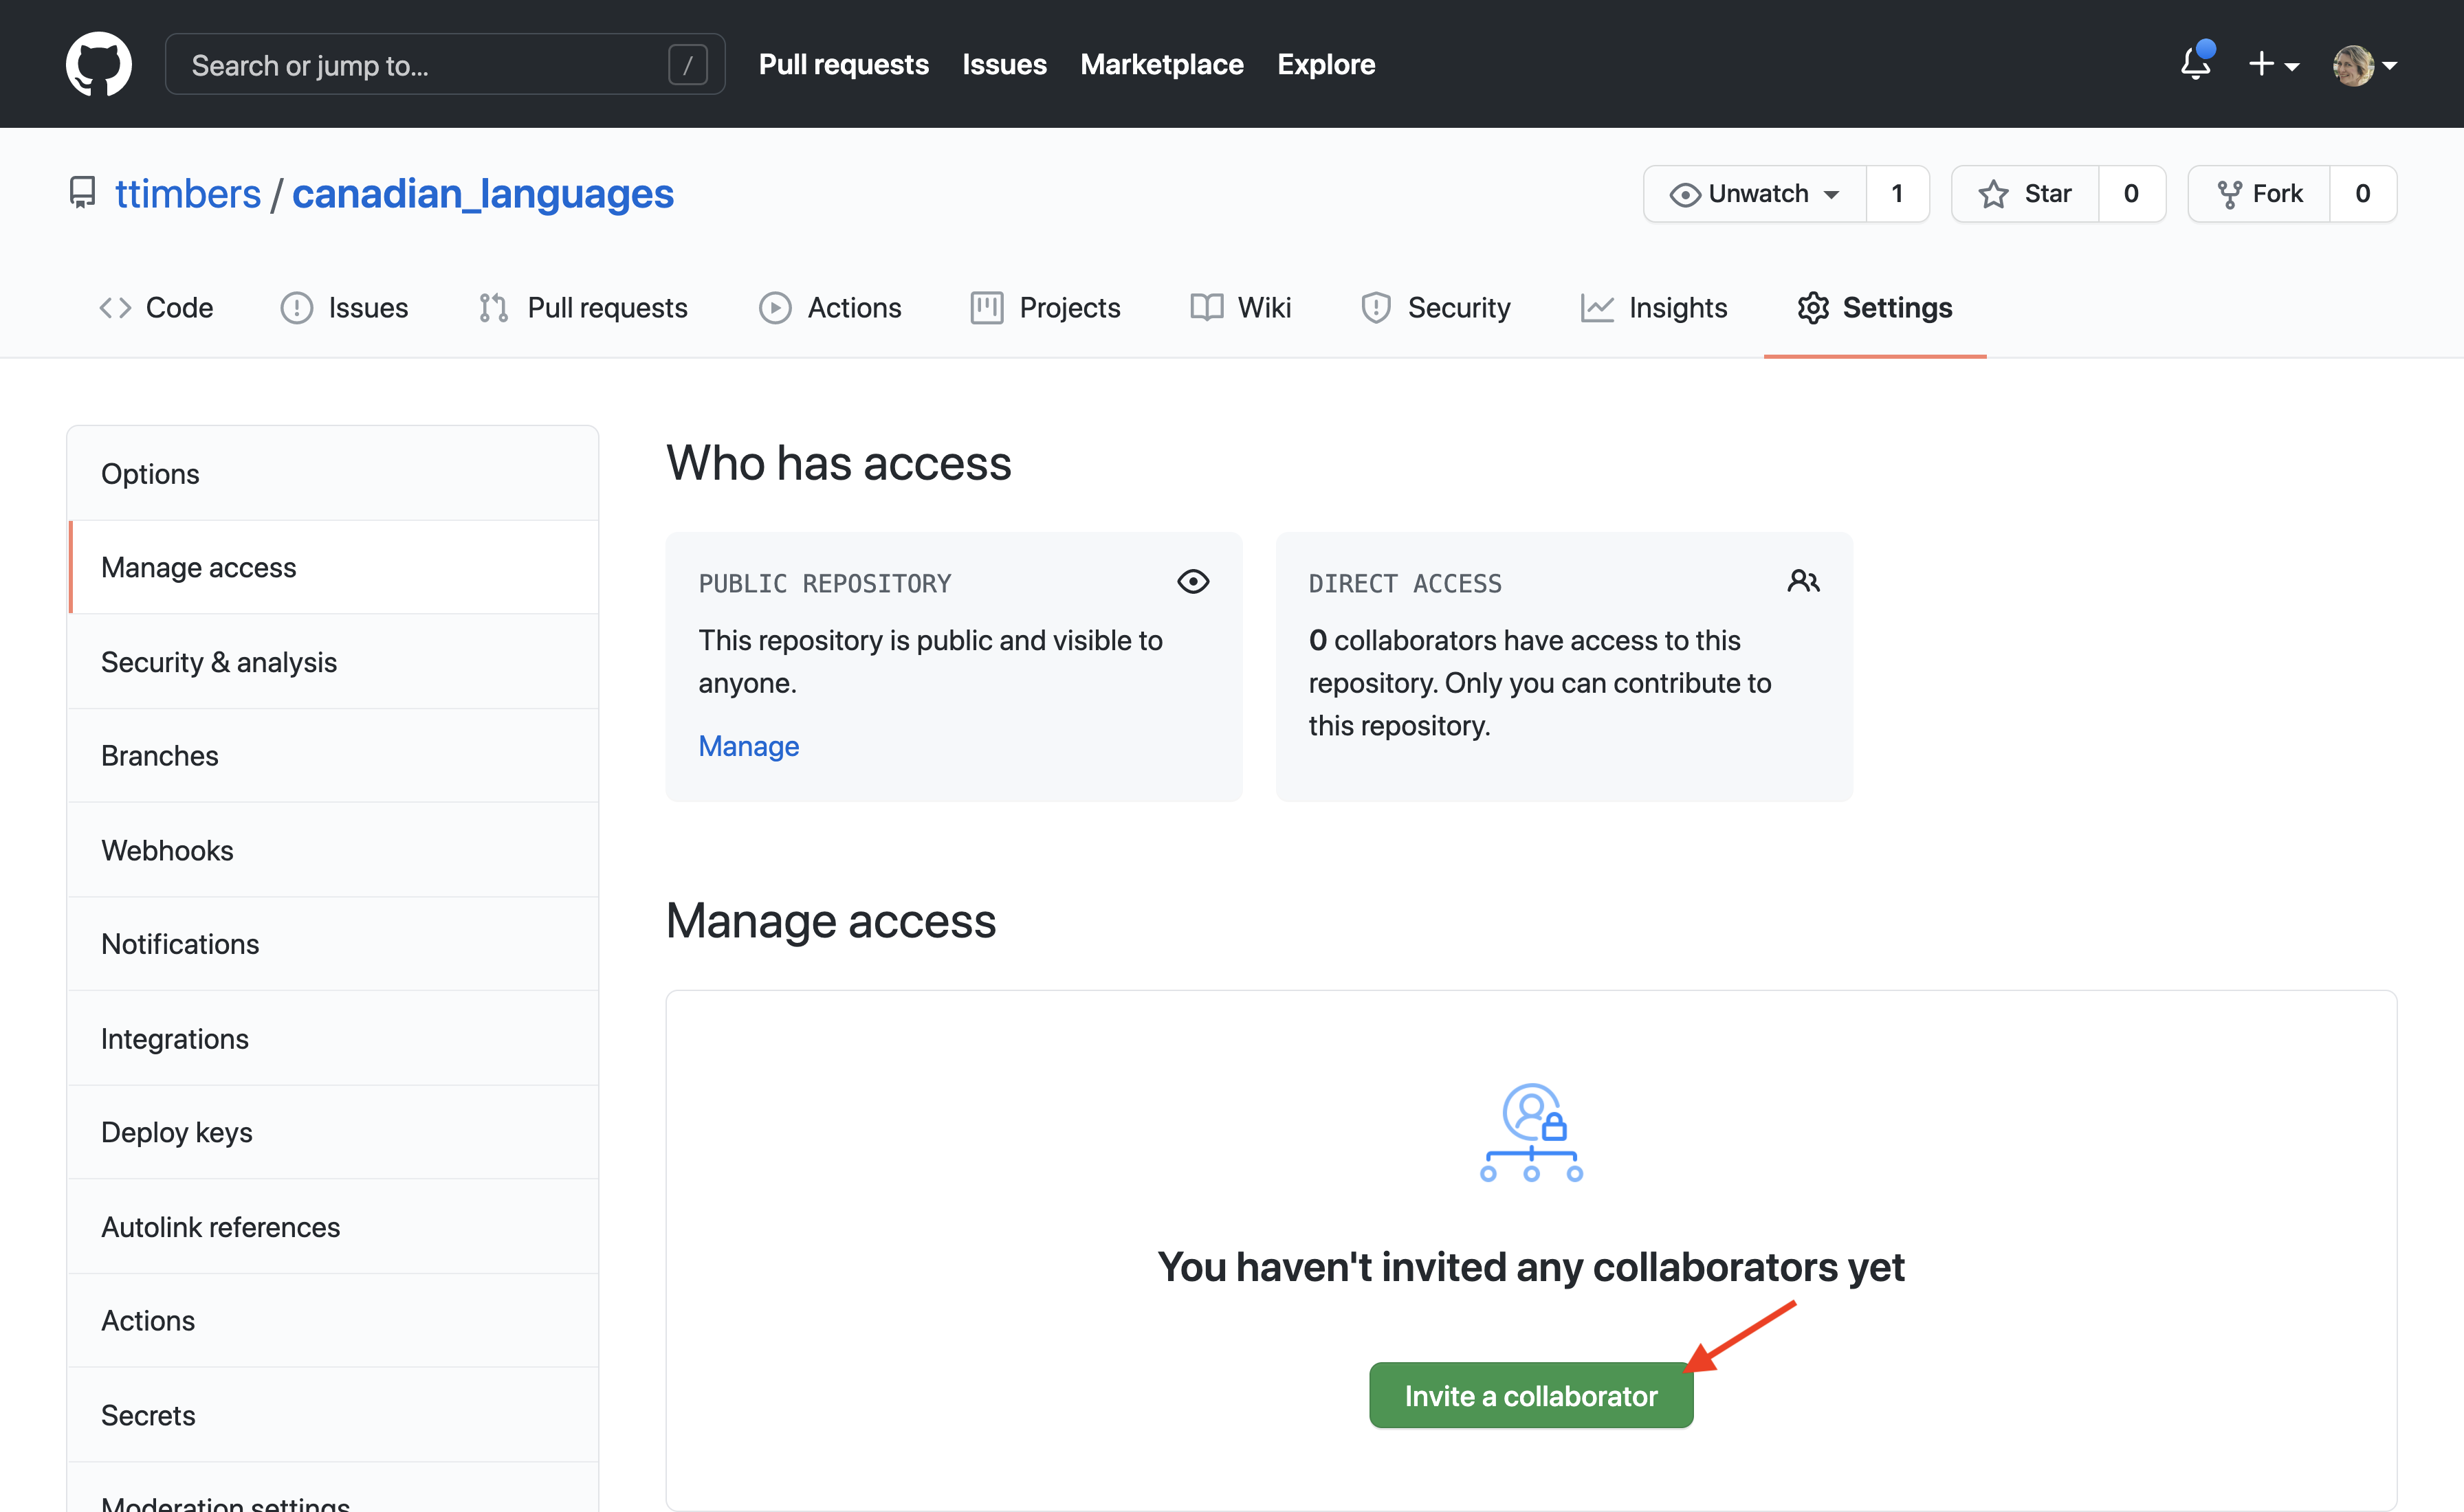 The “Invite a collaborator” button on the GitHub web interface.